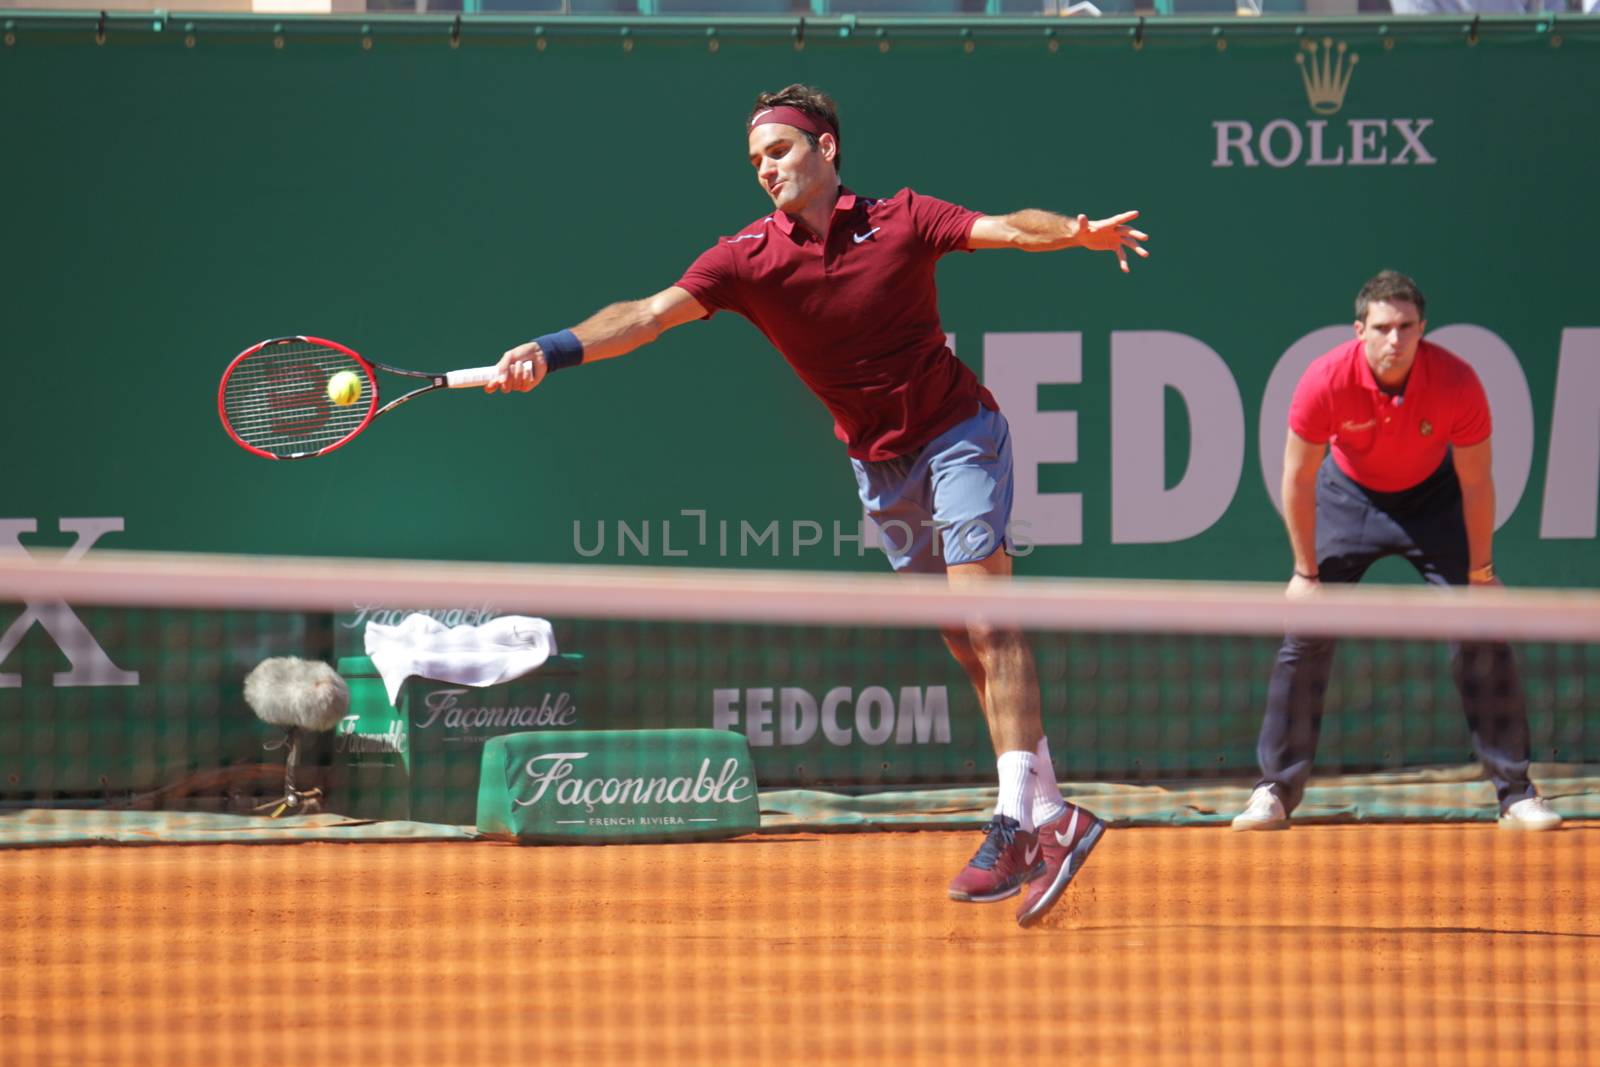 MONACA, Monte-Carlo: Switzerland's Roger Federer hits a return to France's Jo-Wilfried Tsonga during their tennis match at the Monte-Carlo ATP Masters Series tournament on April 15, 2016 in Monaco. France's Jo-Wilfried Tsonga is through to the Monte Carlo Masters semi-finals following a win over Switzerland's Roger Federer.